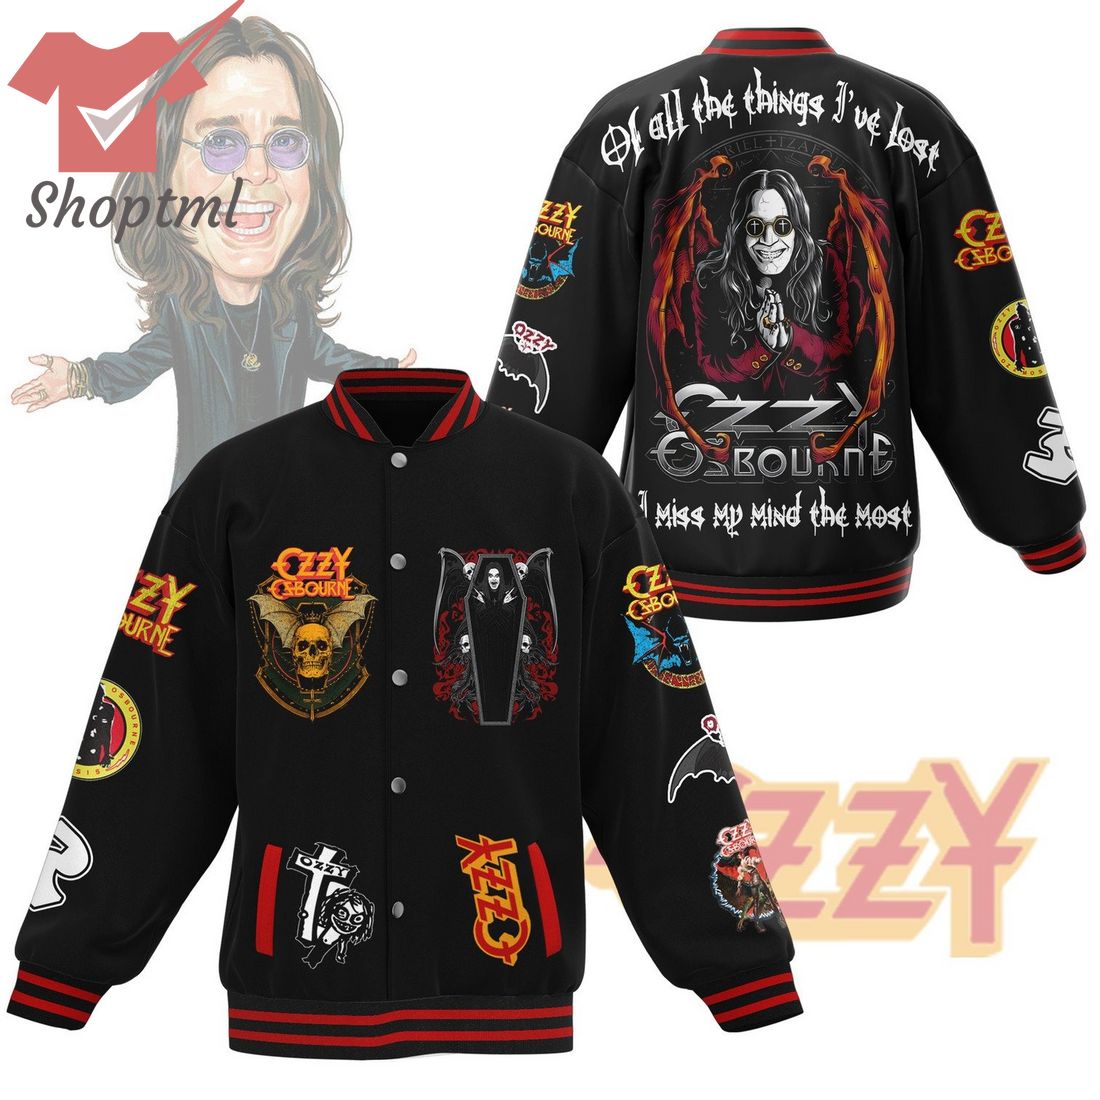 Ozzy Osbourne of all the things i've lost i miss my mind the most baseball jacket